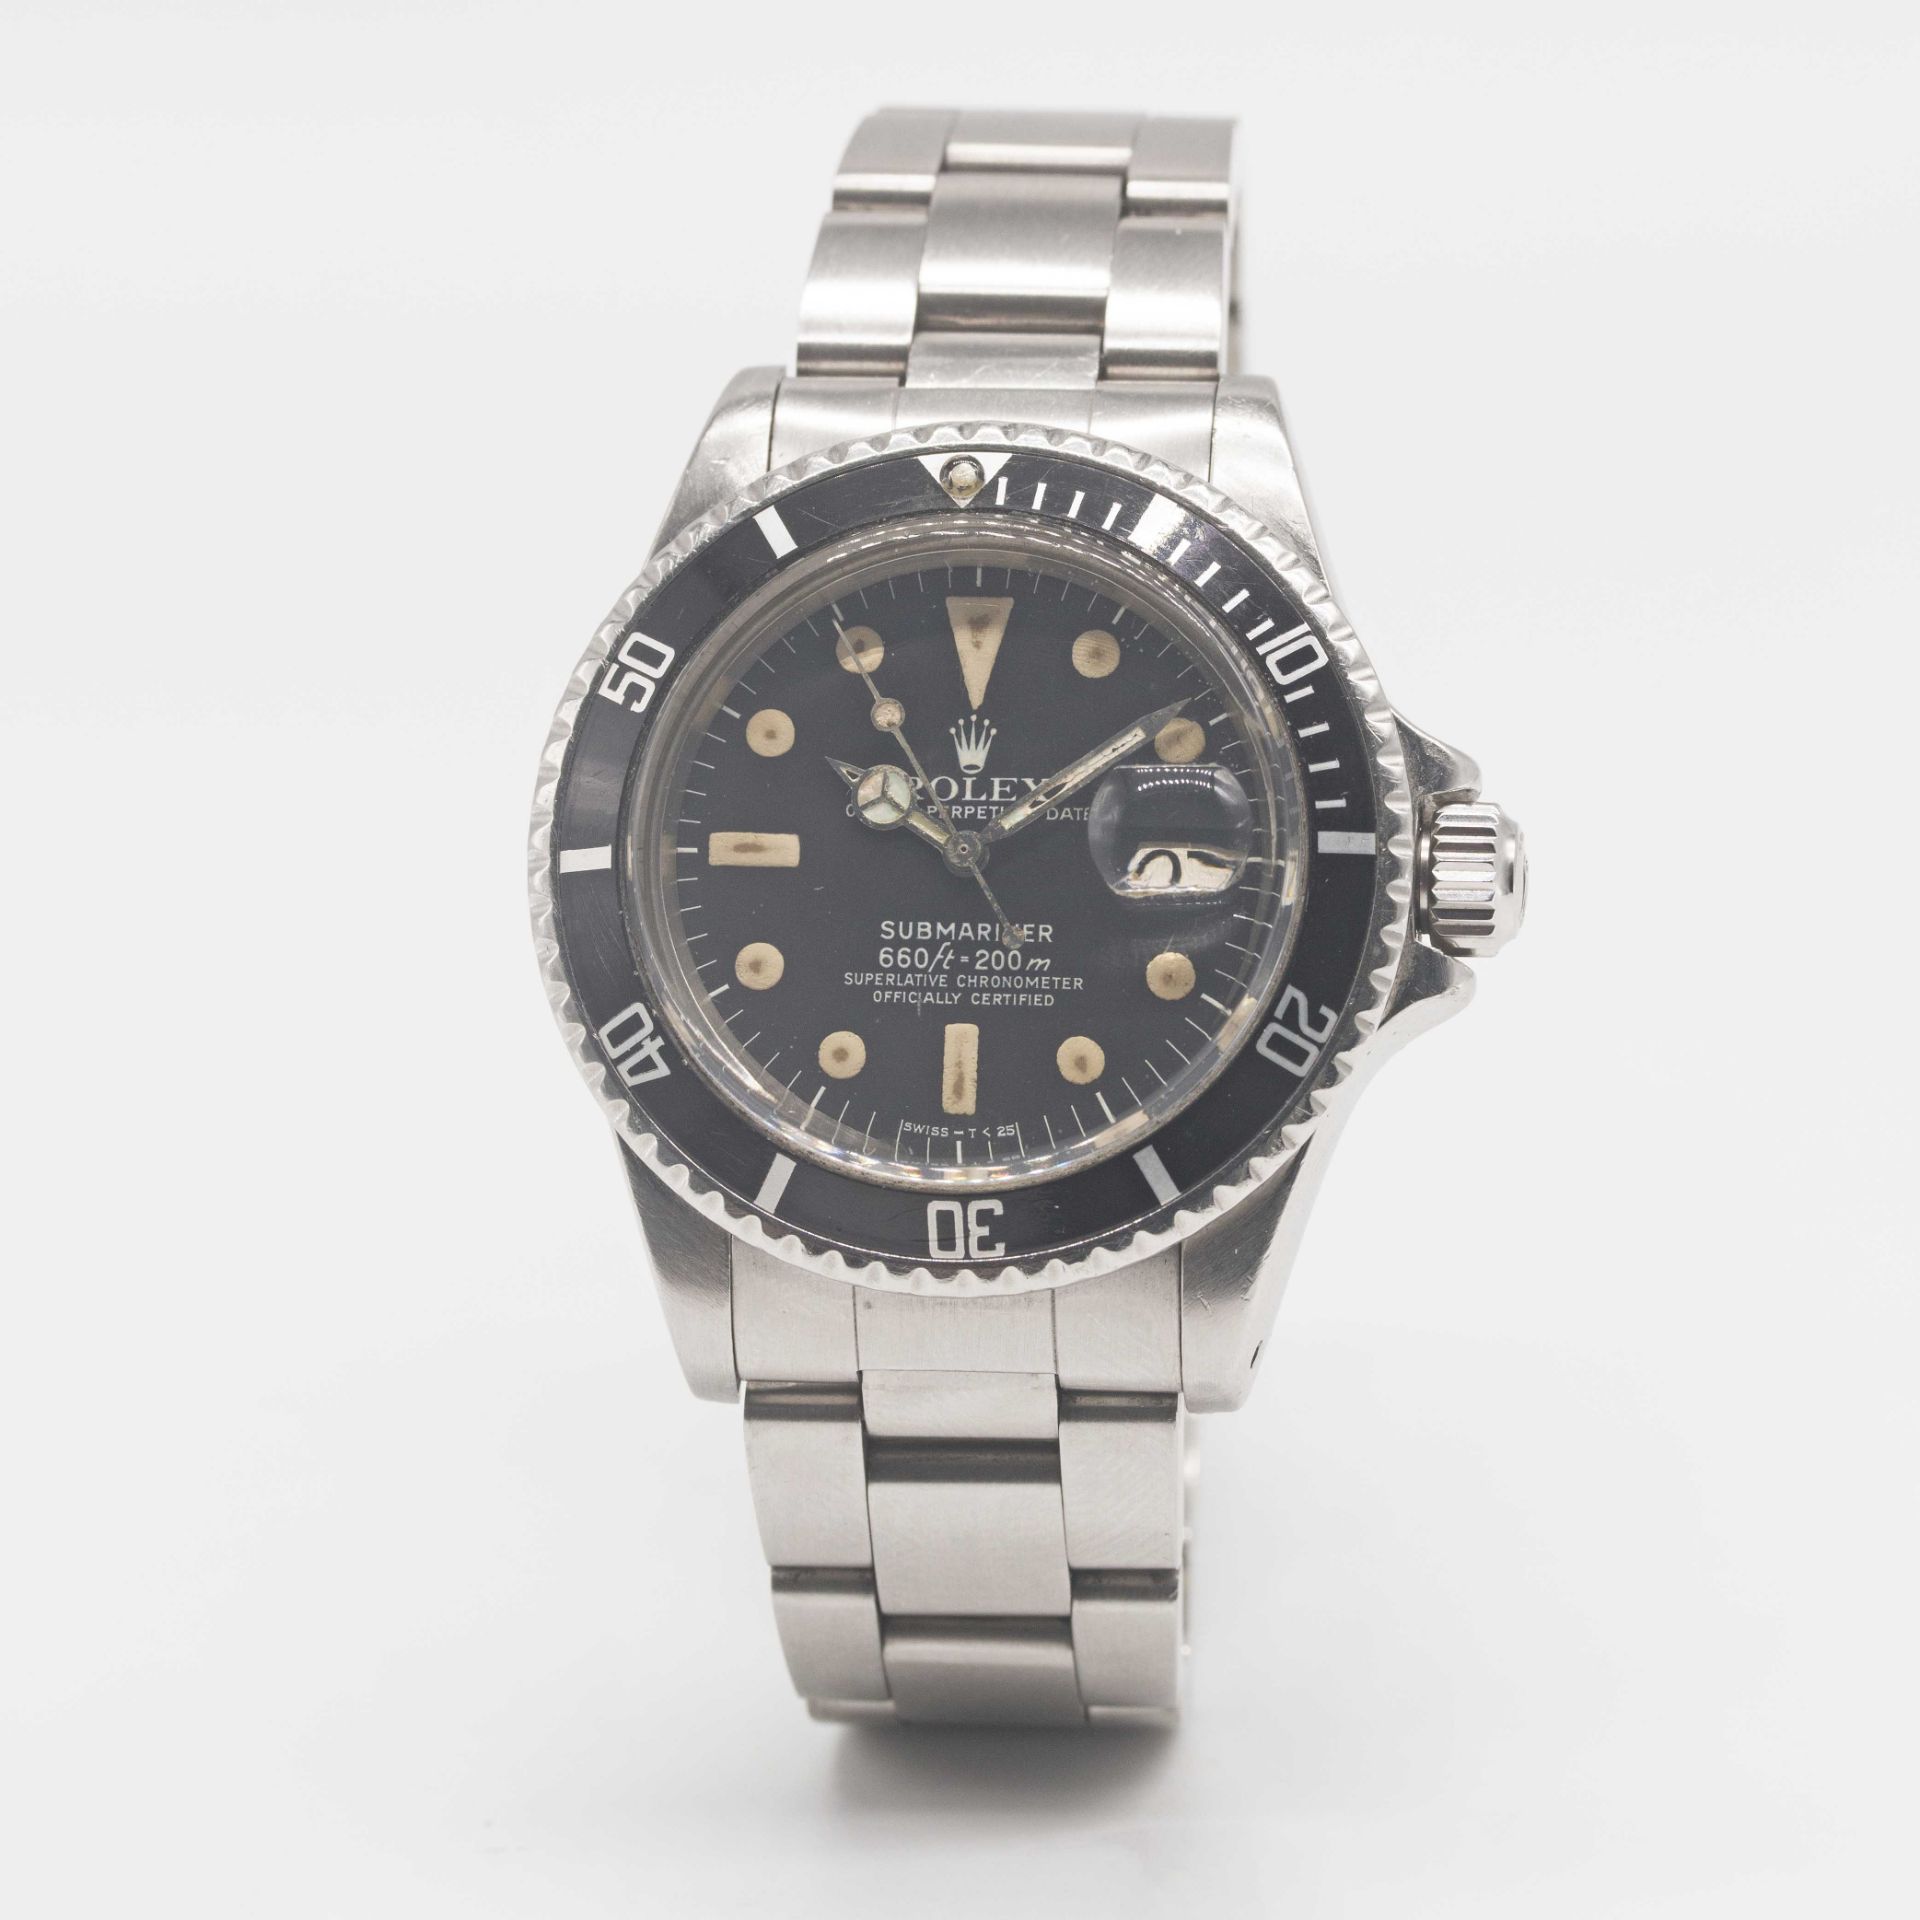 A GENTLEMAN'S STAINLESS STEEL ROLEX OYSTER PERPETUAL DATE SUBMARINER BRACELET WATCH CIRCA 1978, REF. - Image 4 of 10